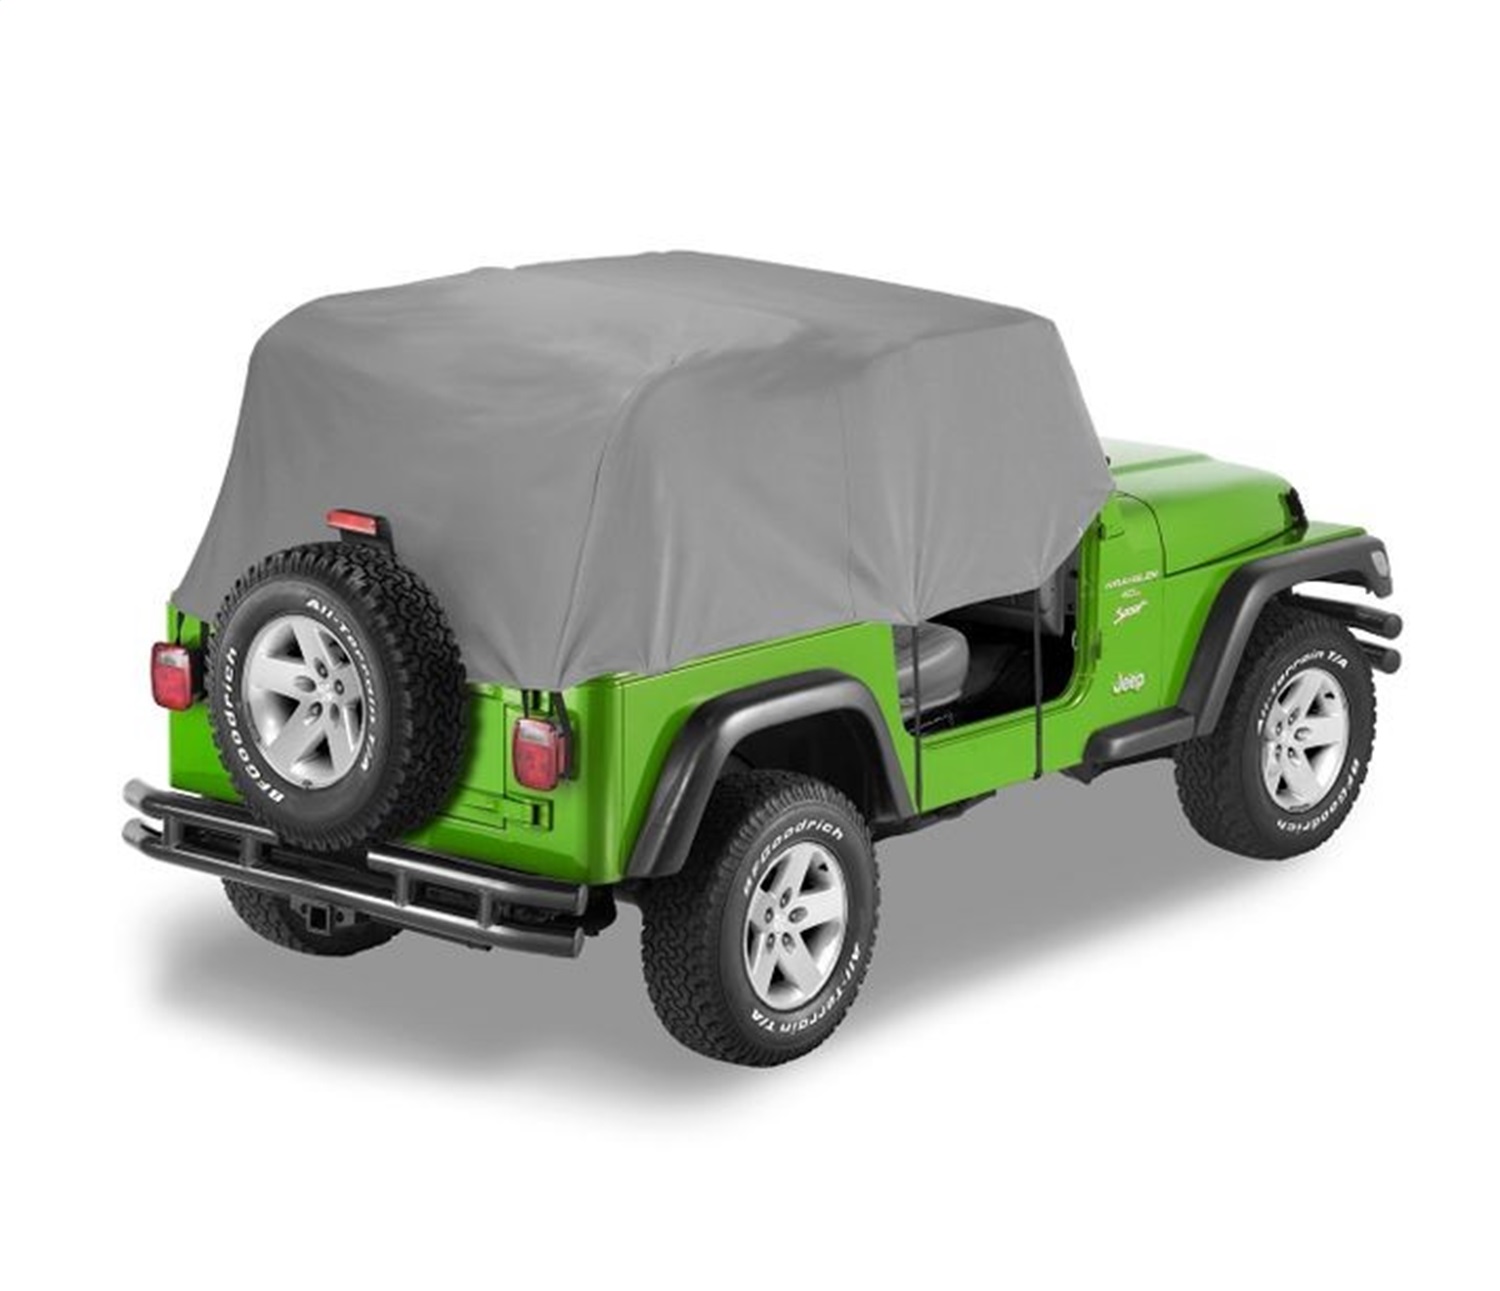 Bestop All Weather Trail Cover for Jeep 97 to 06 Wrangler TJ